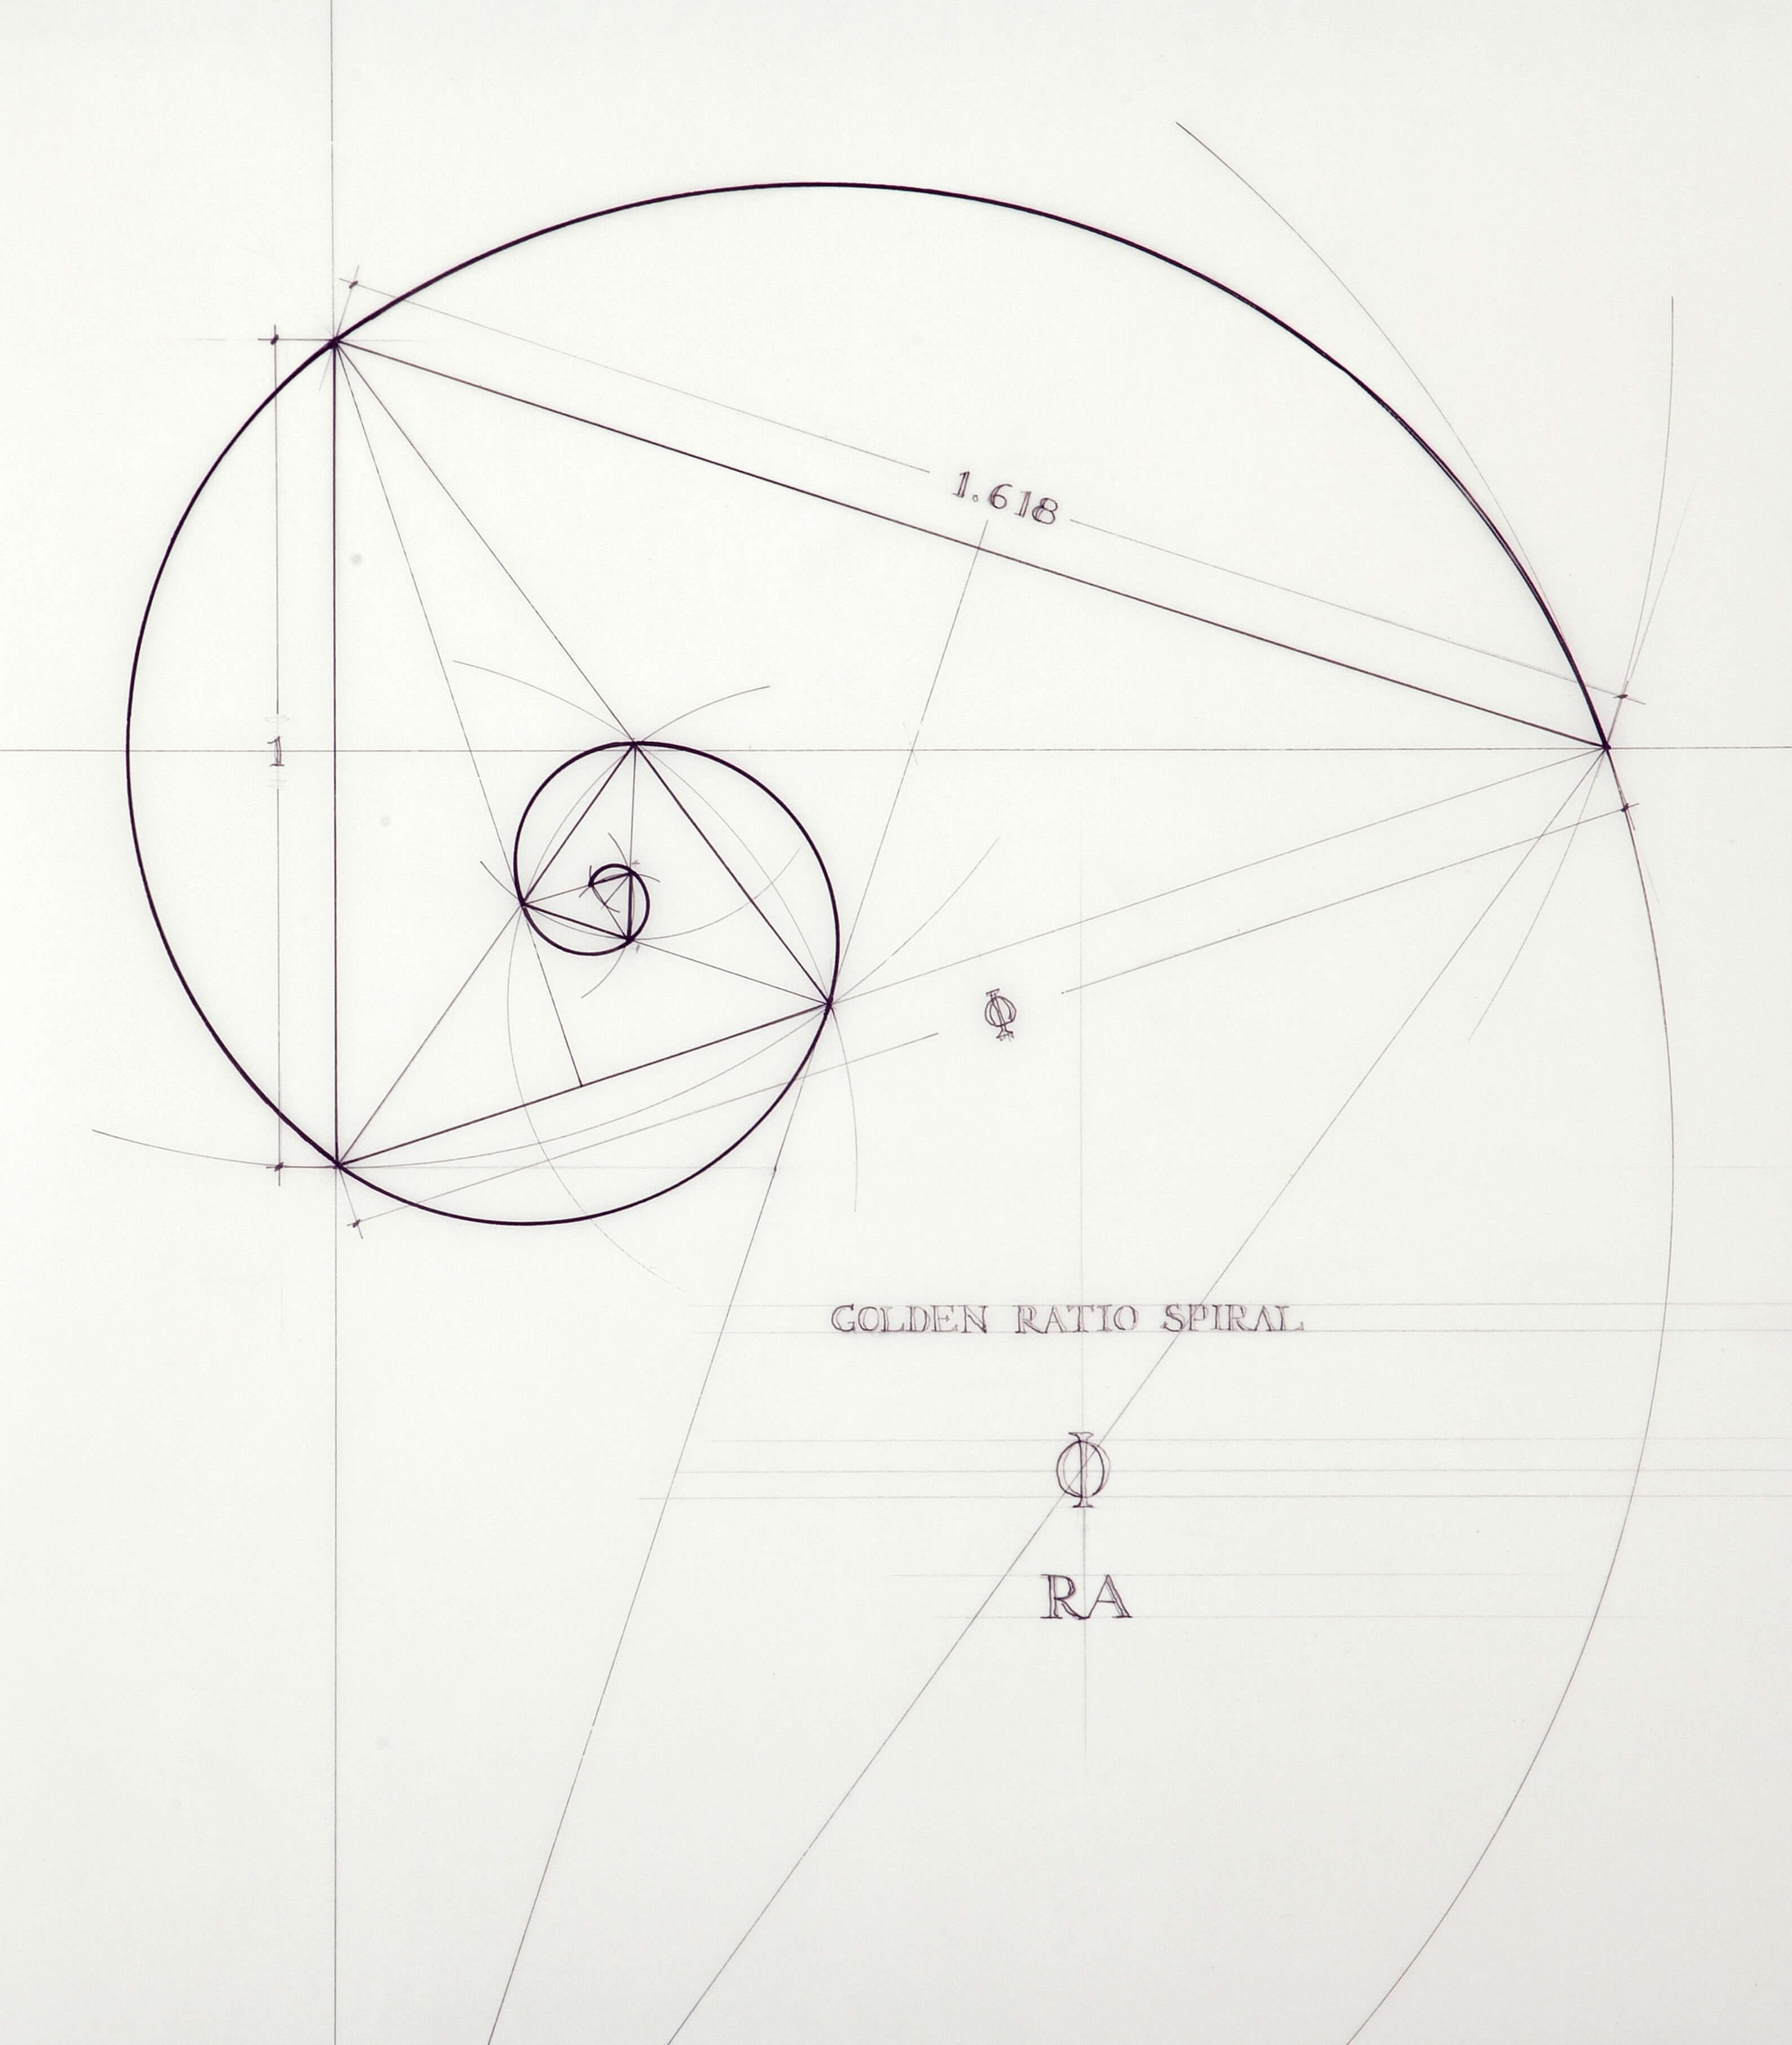 An artist masterfully illustrates the golden ratio, by hand - Aleph